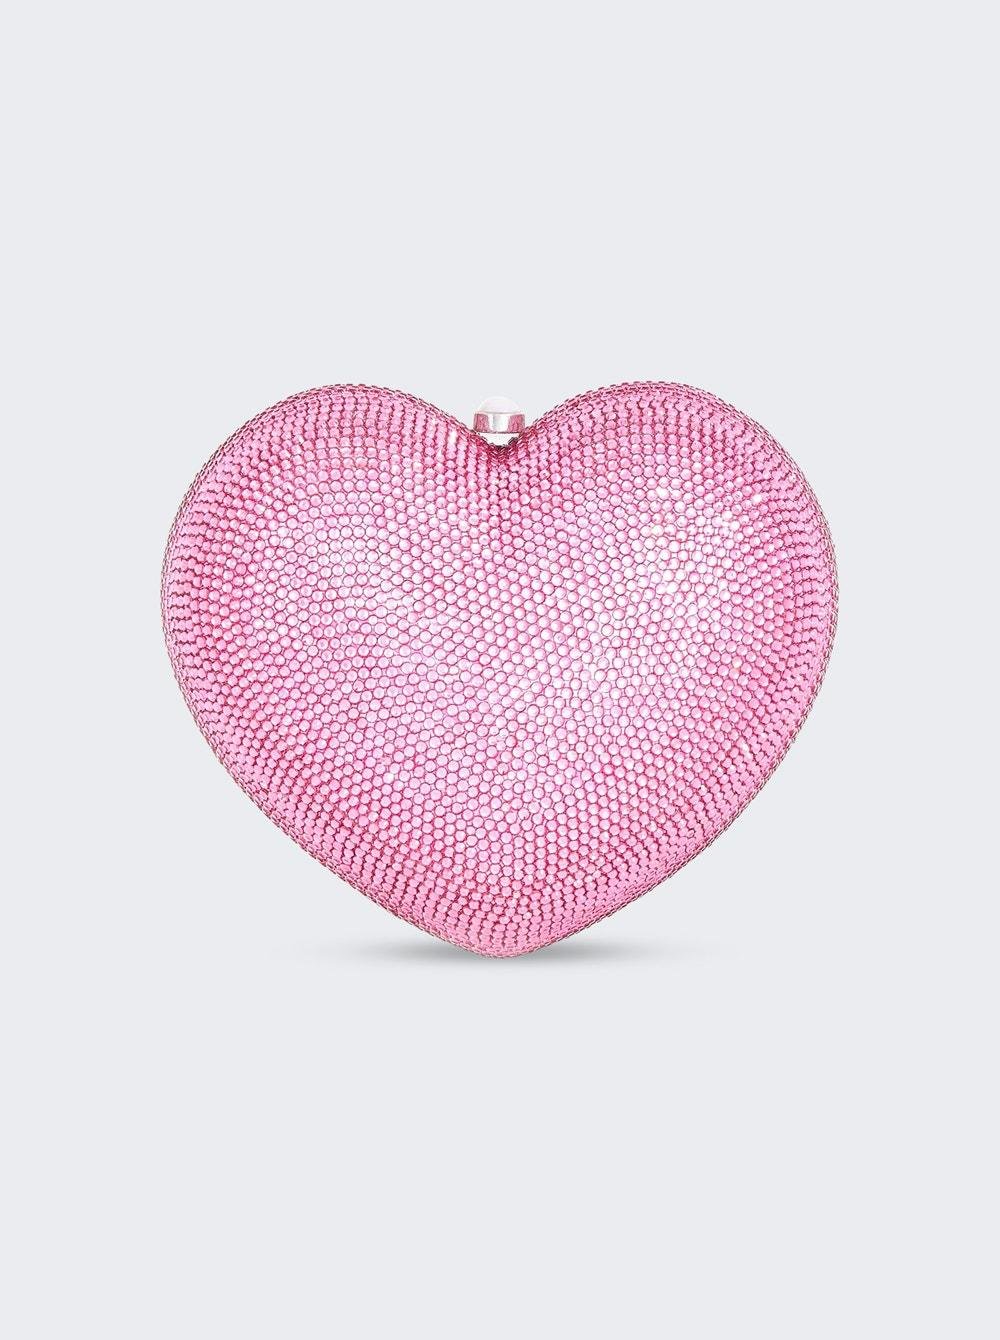 Petit Coeur L'amour Silver Pink  | The Webster by JUDITH LEIBER